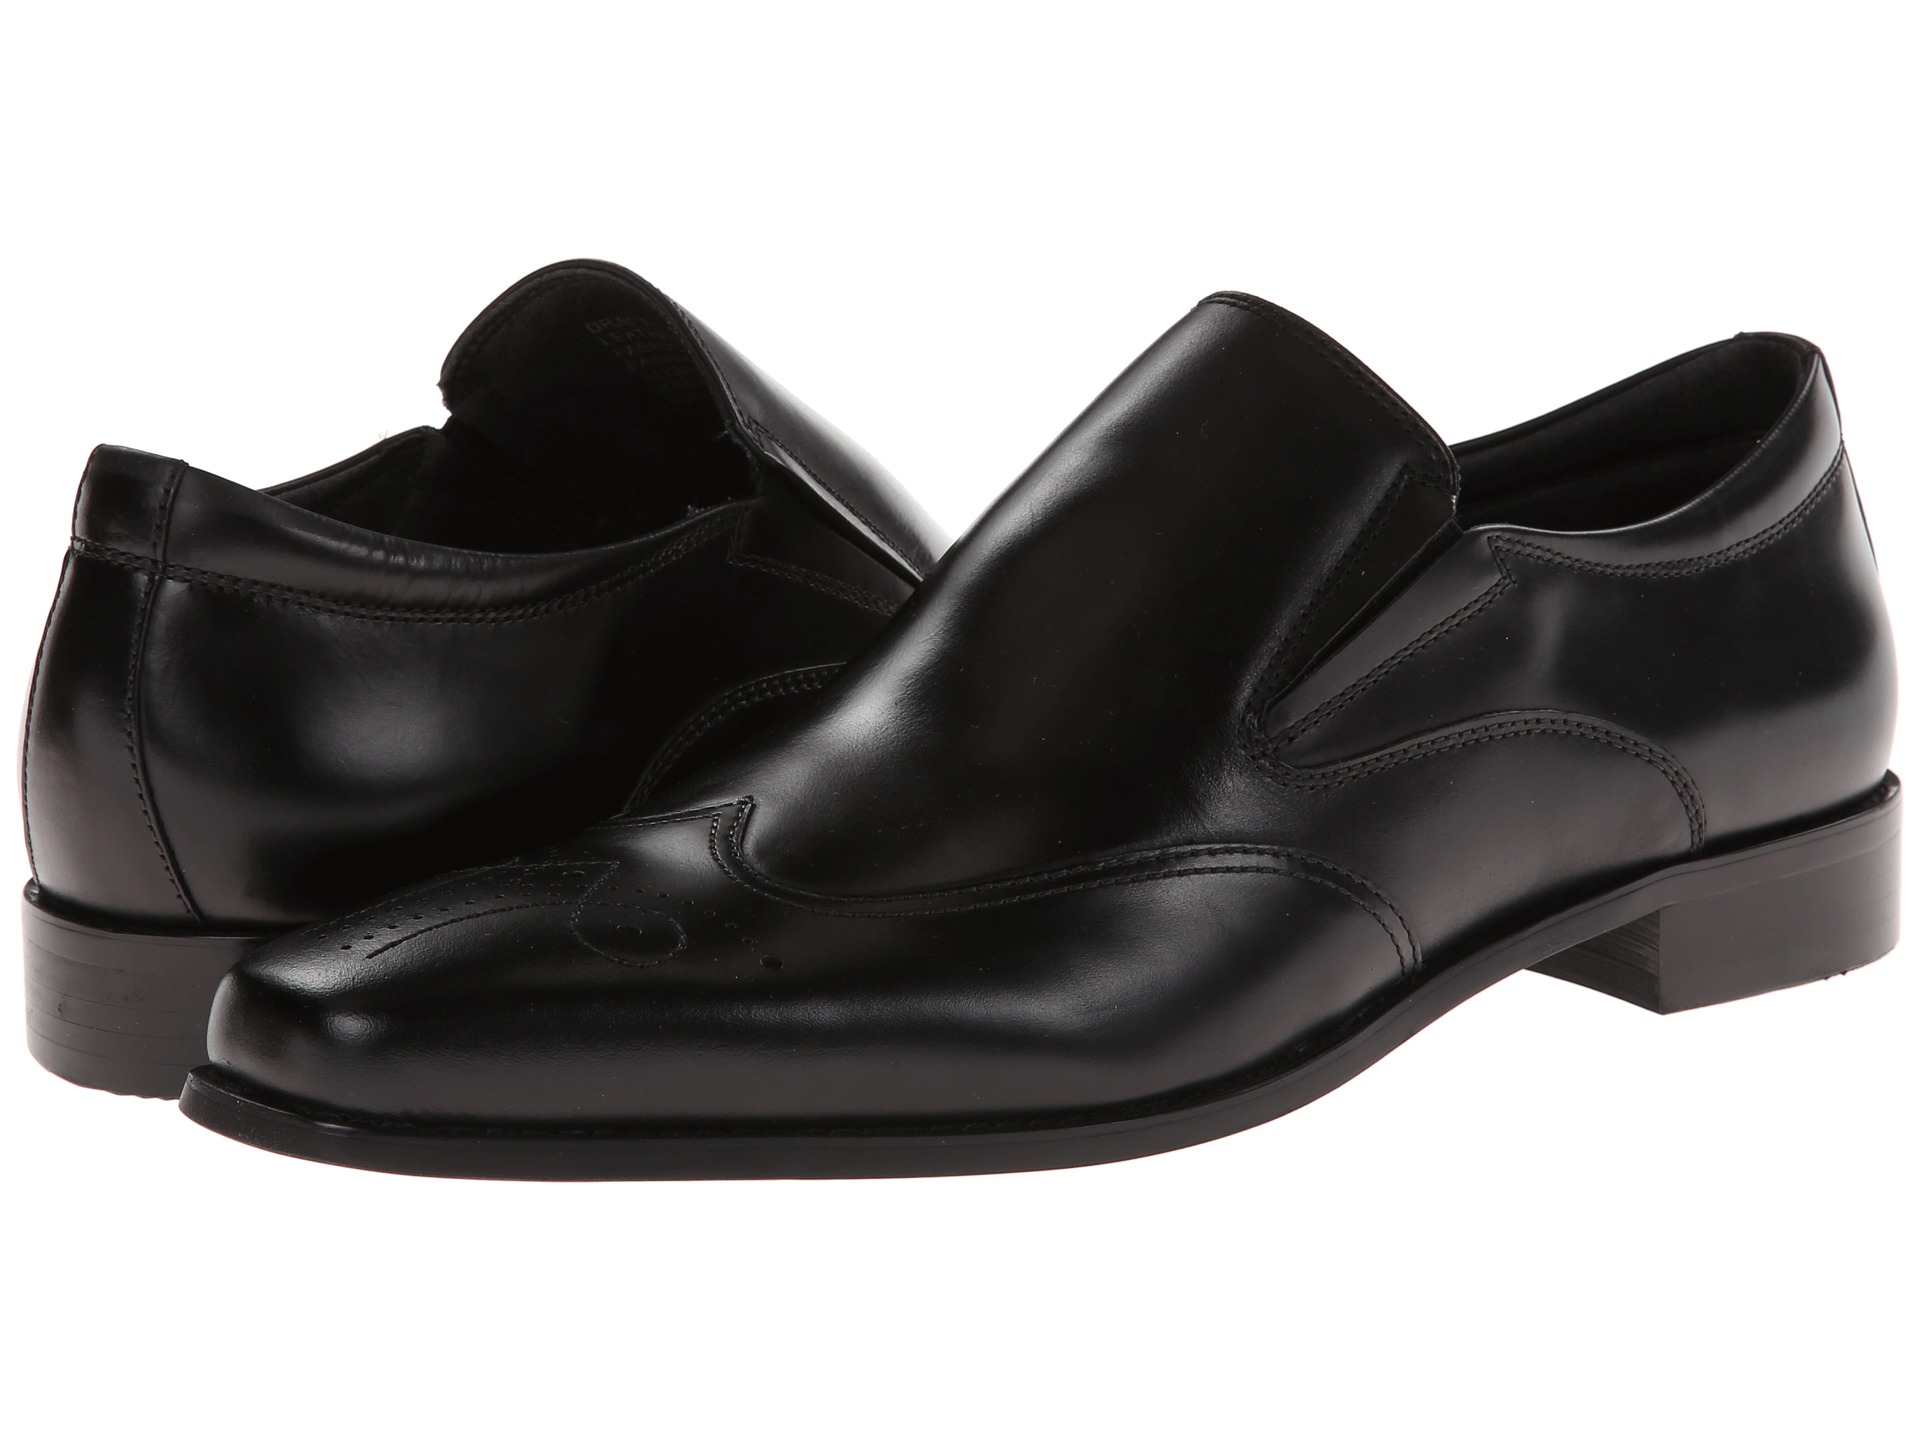 Steve Madden Draftt Black Leather | Shipped Free at Zappos